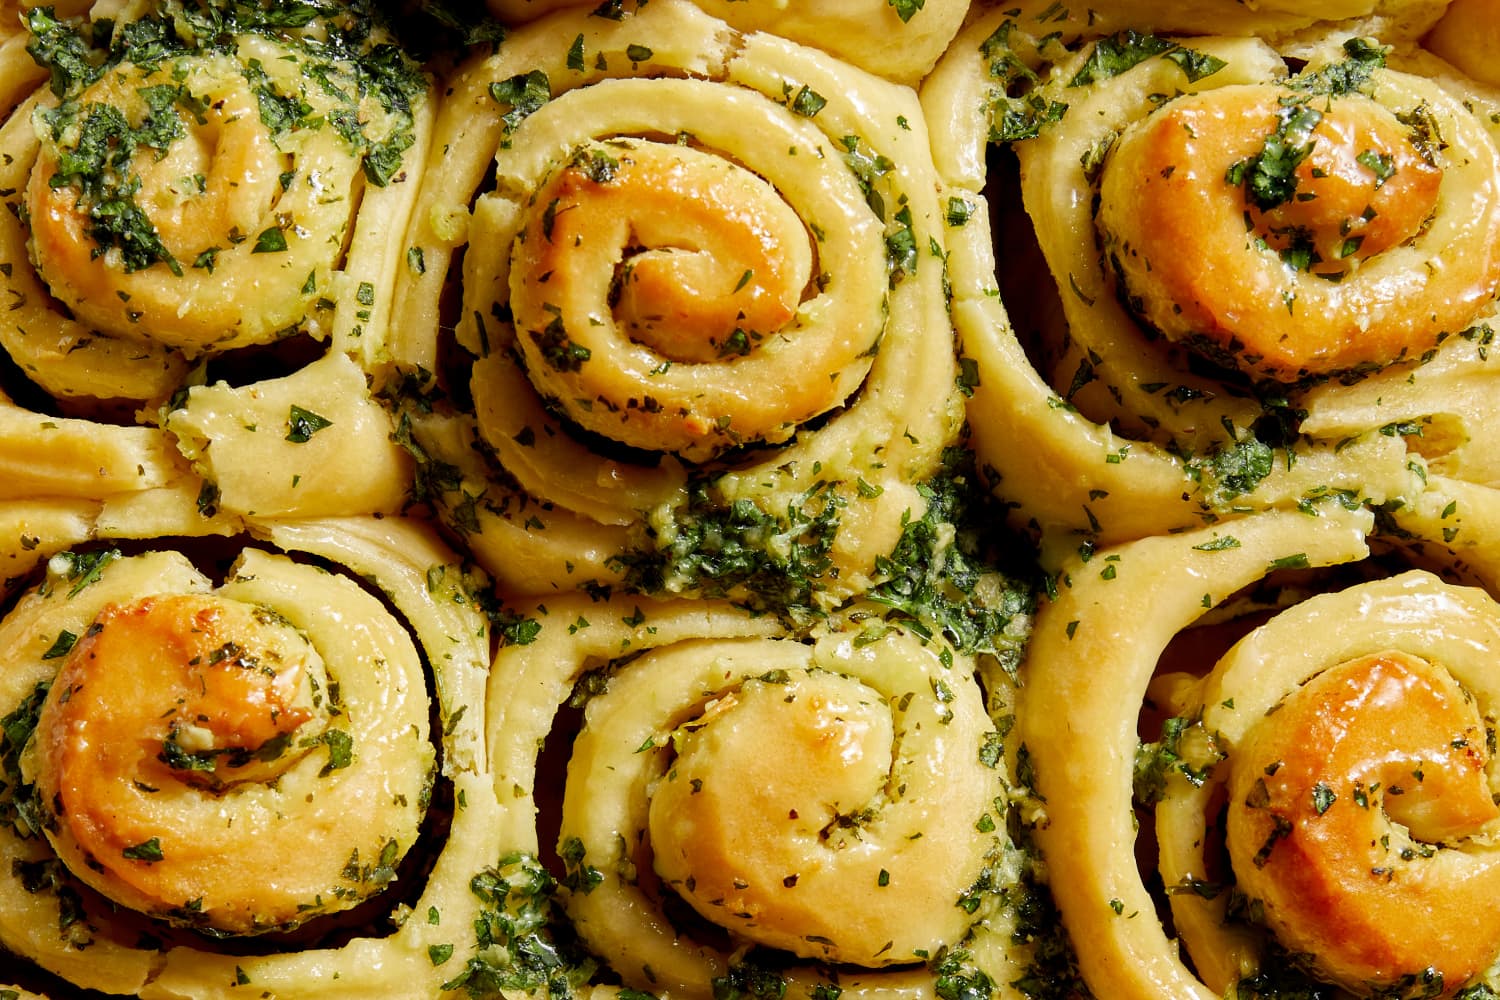 It’s Official: Garlic-Swirl Rolls Are the New Garlic Knots